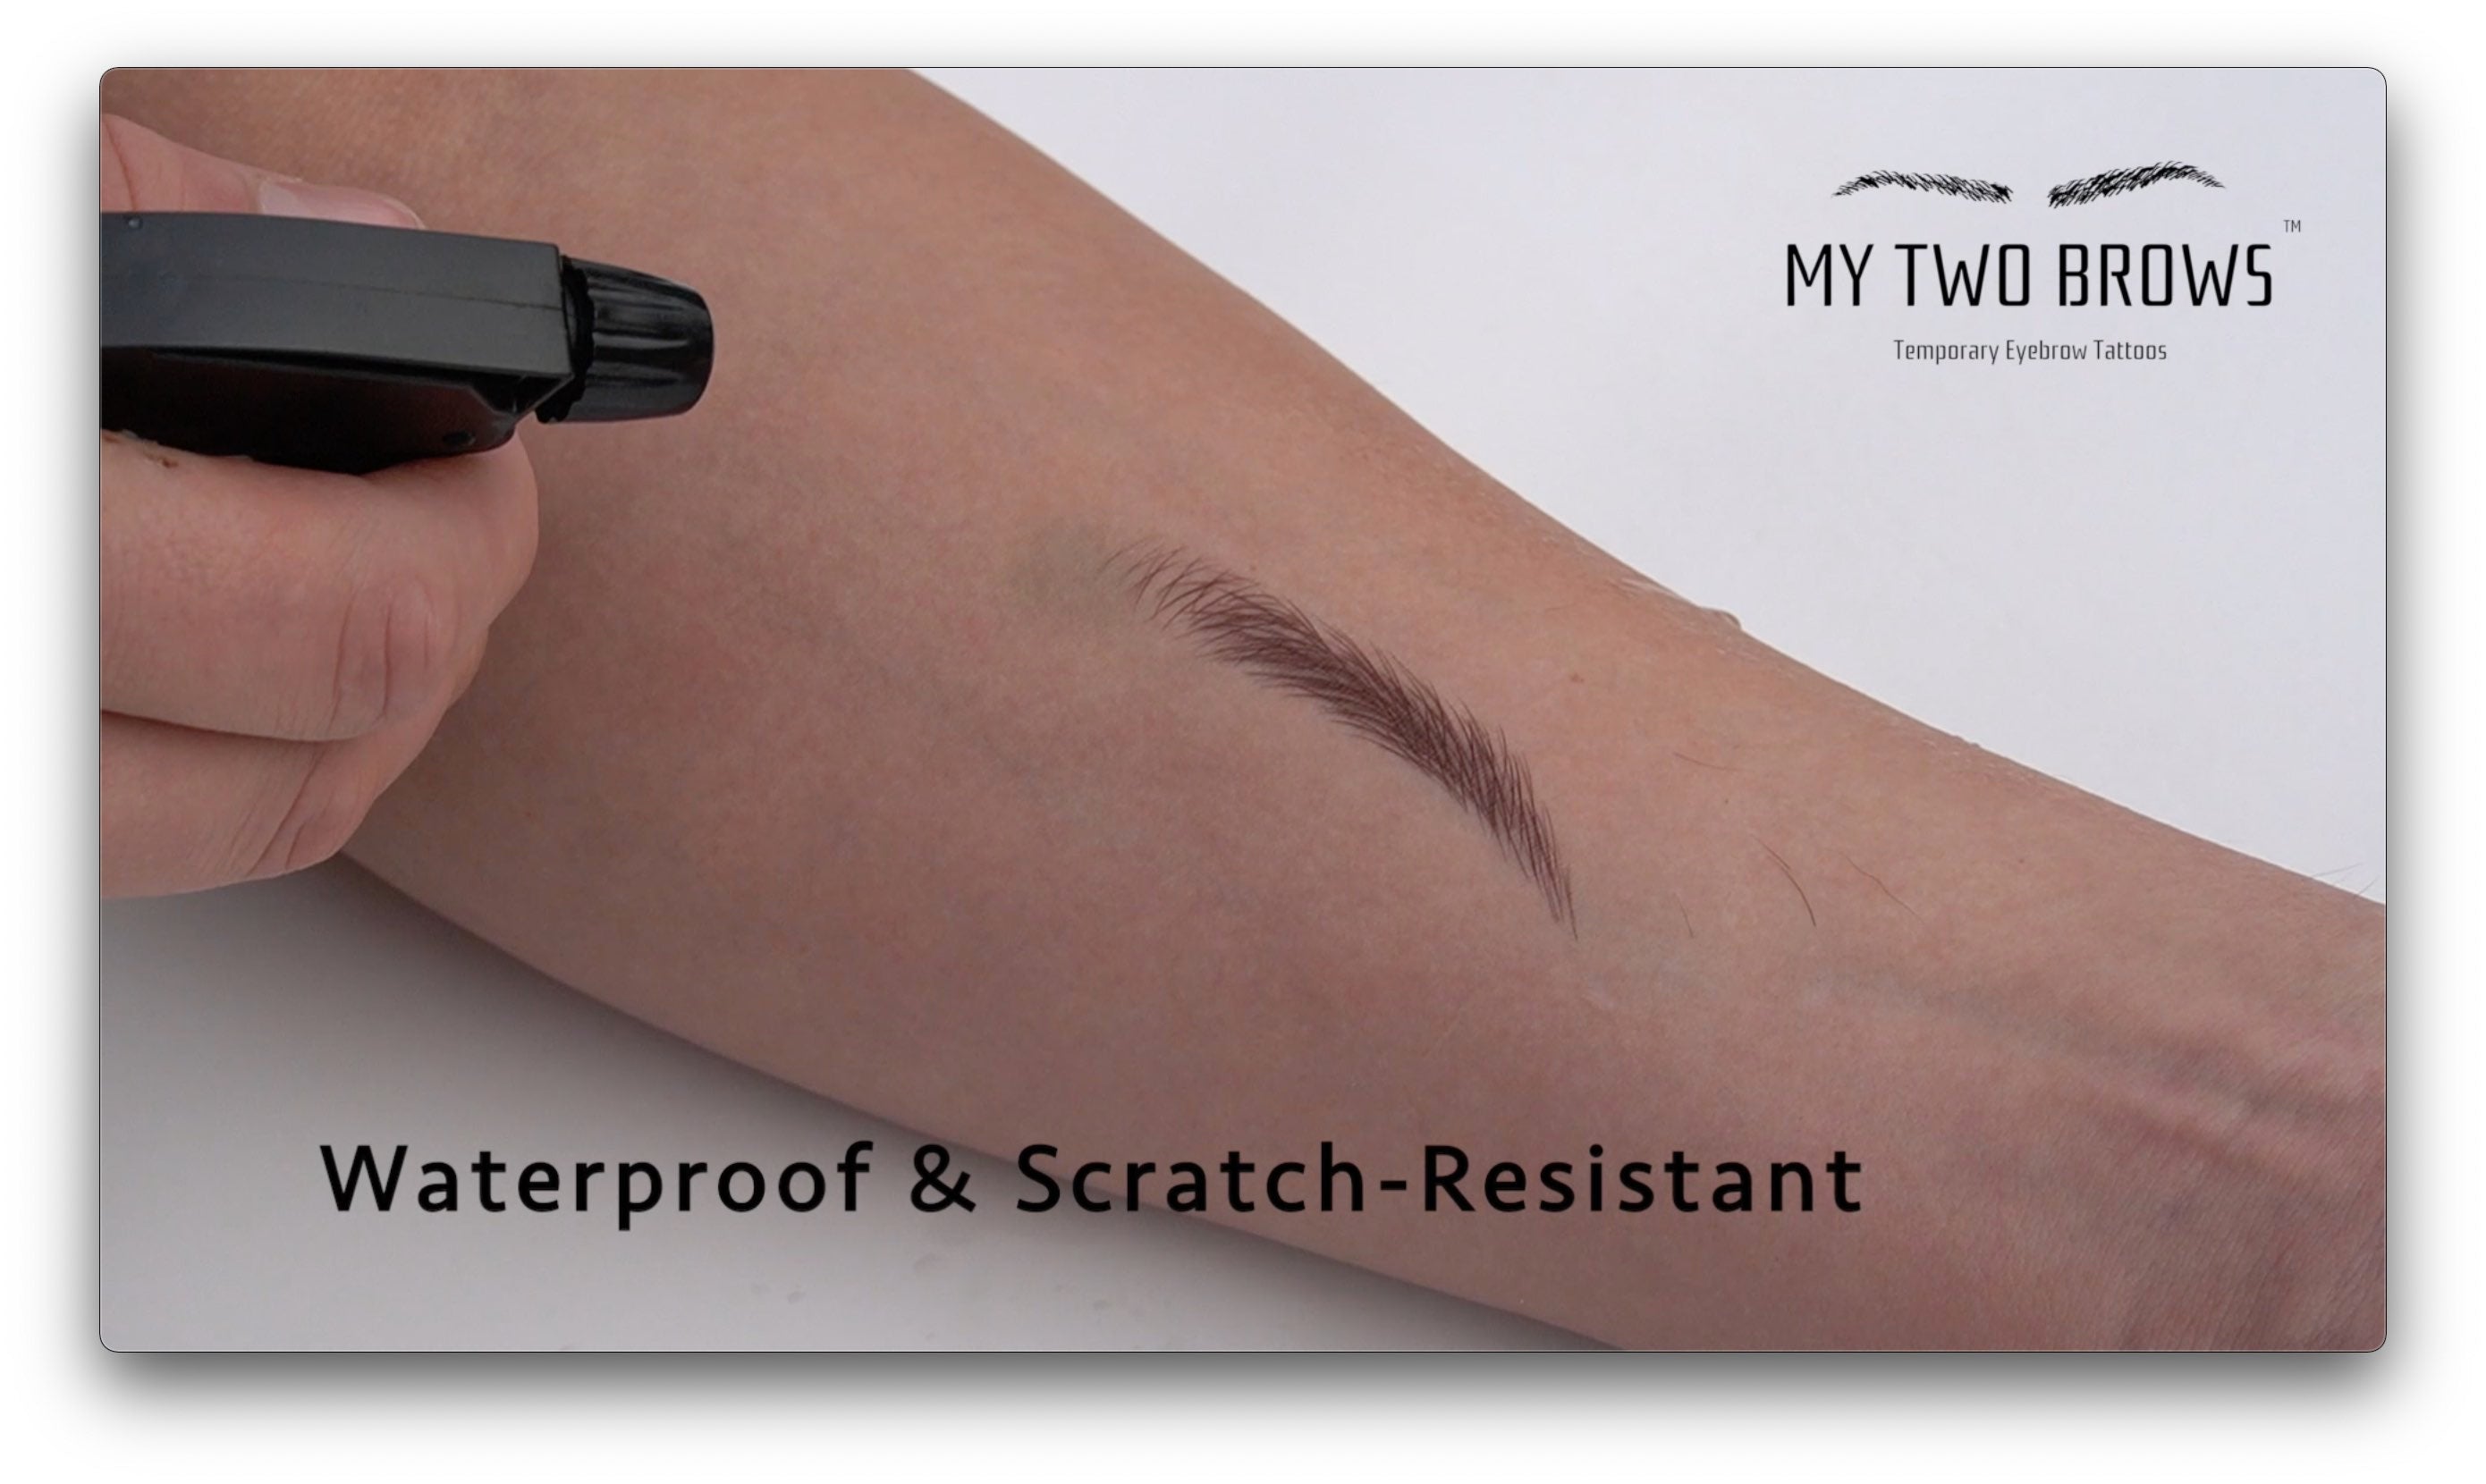 Load video: My Two Brows - Waterproof &amp; Scratch Resistant